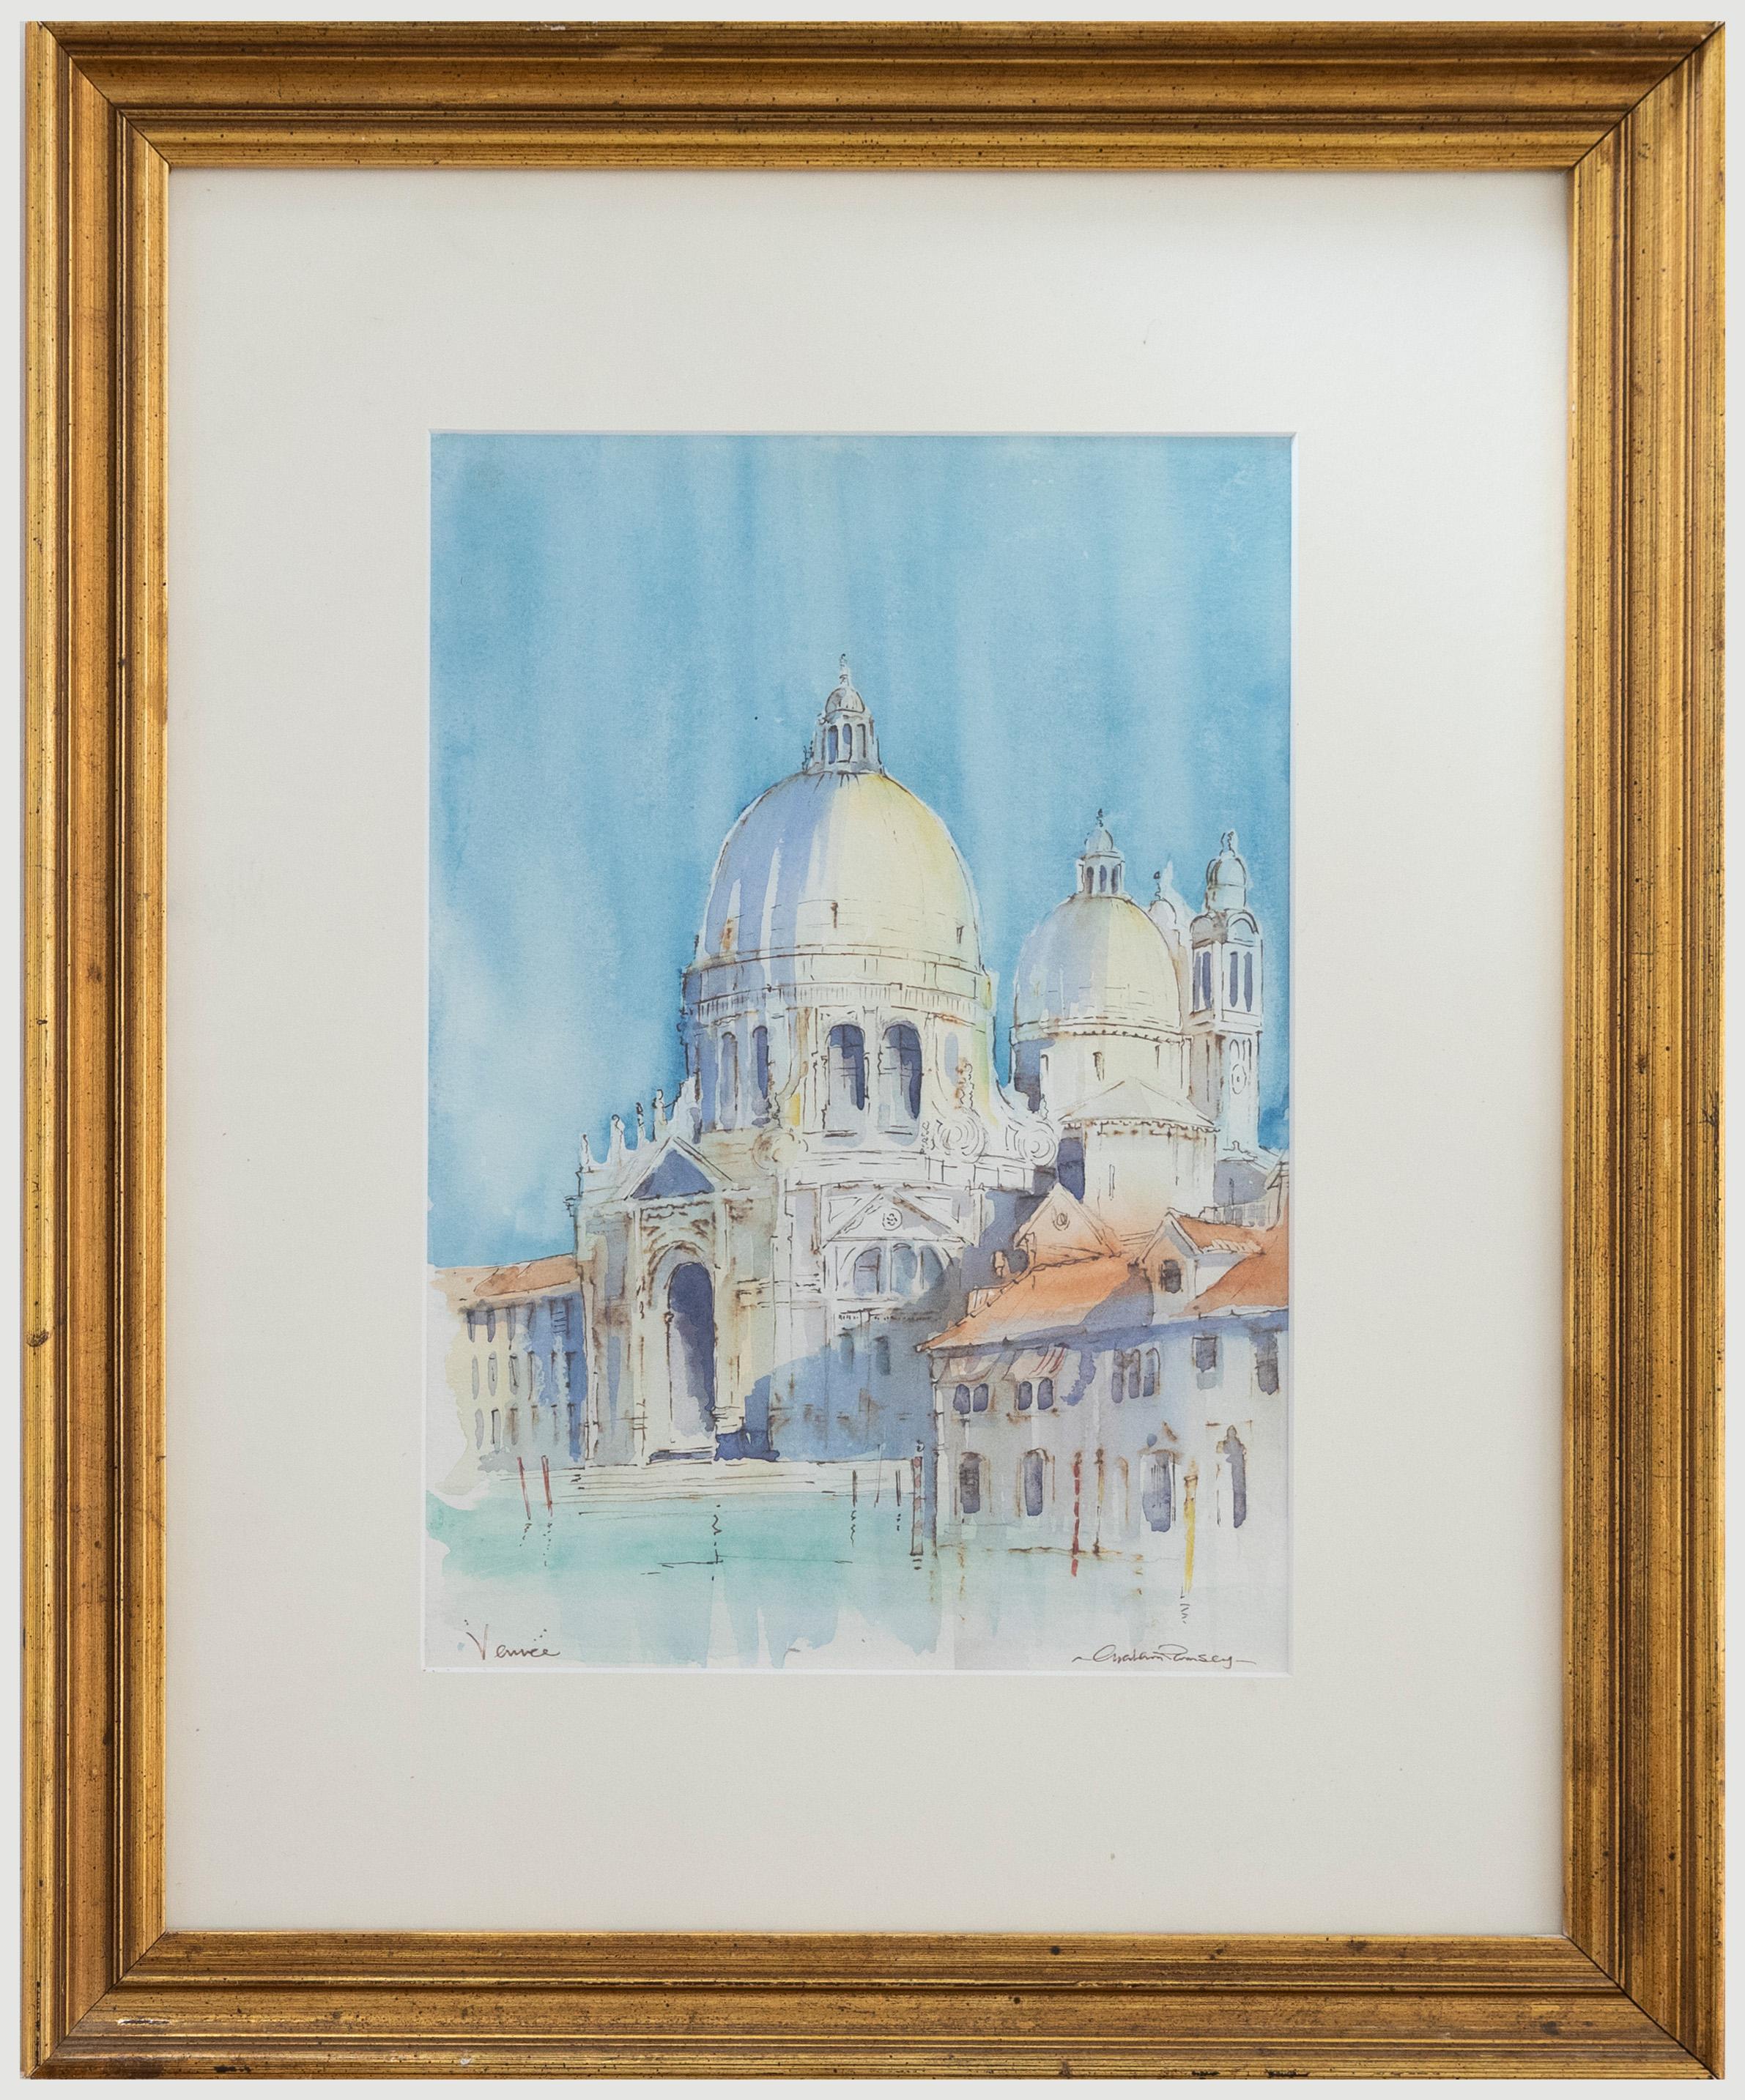 Signed by the artist and inscribed 'Venice' to the lower margin. Well-presented in a crisp white mount and gilt-wood frame. On watercolour paper.